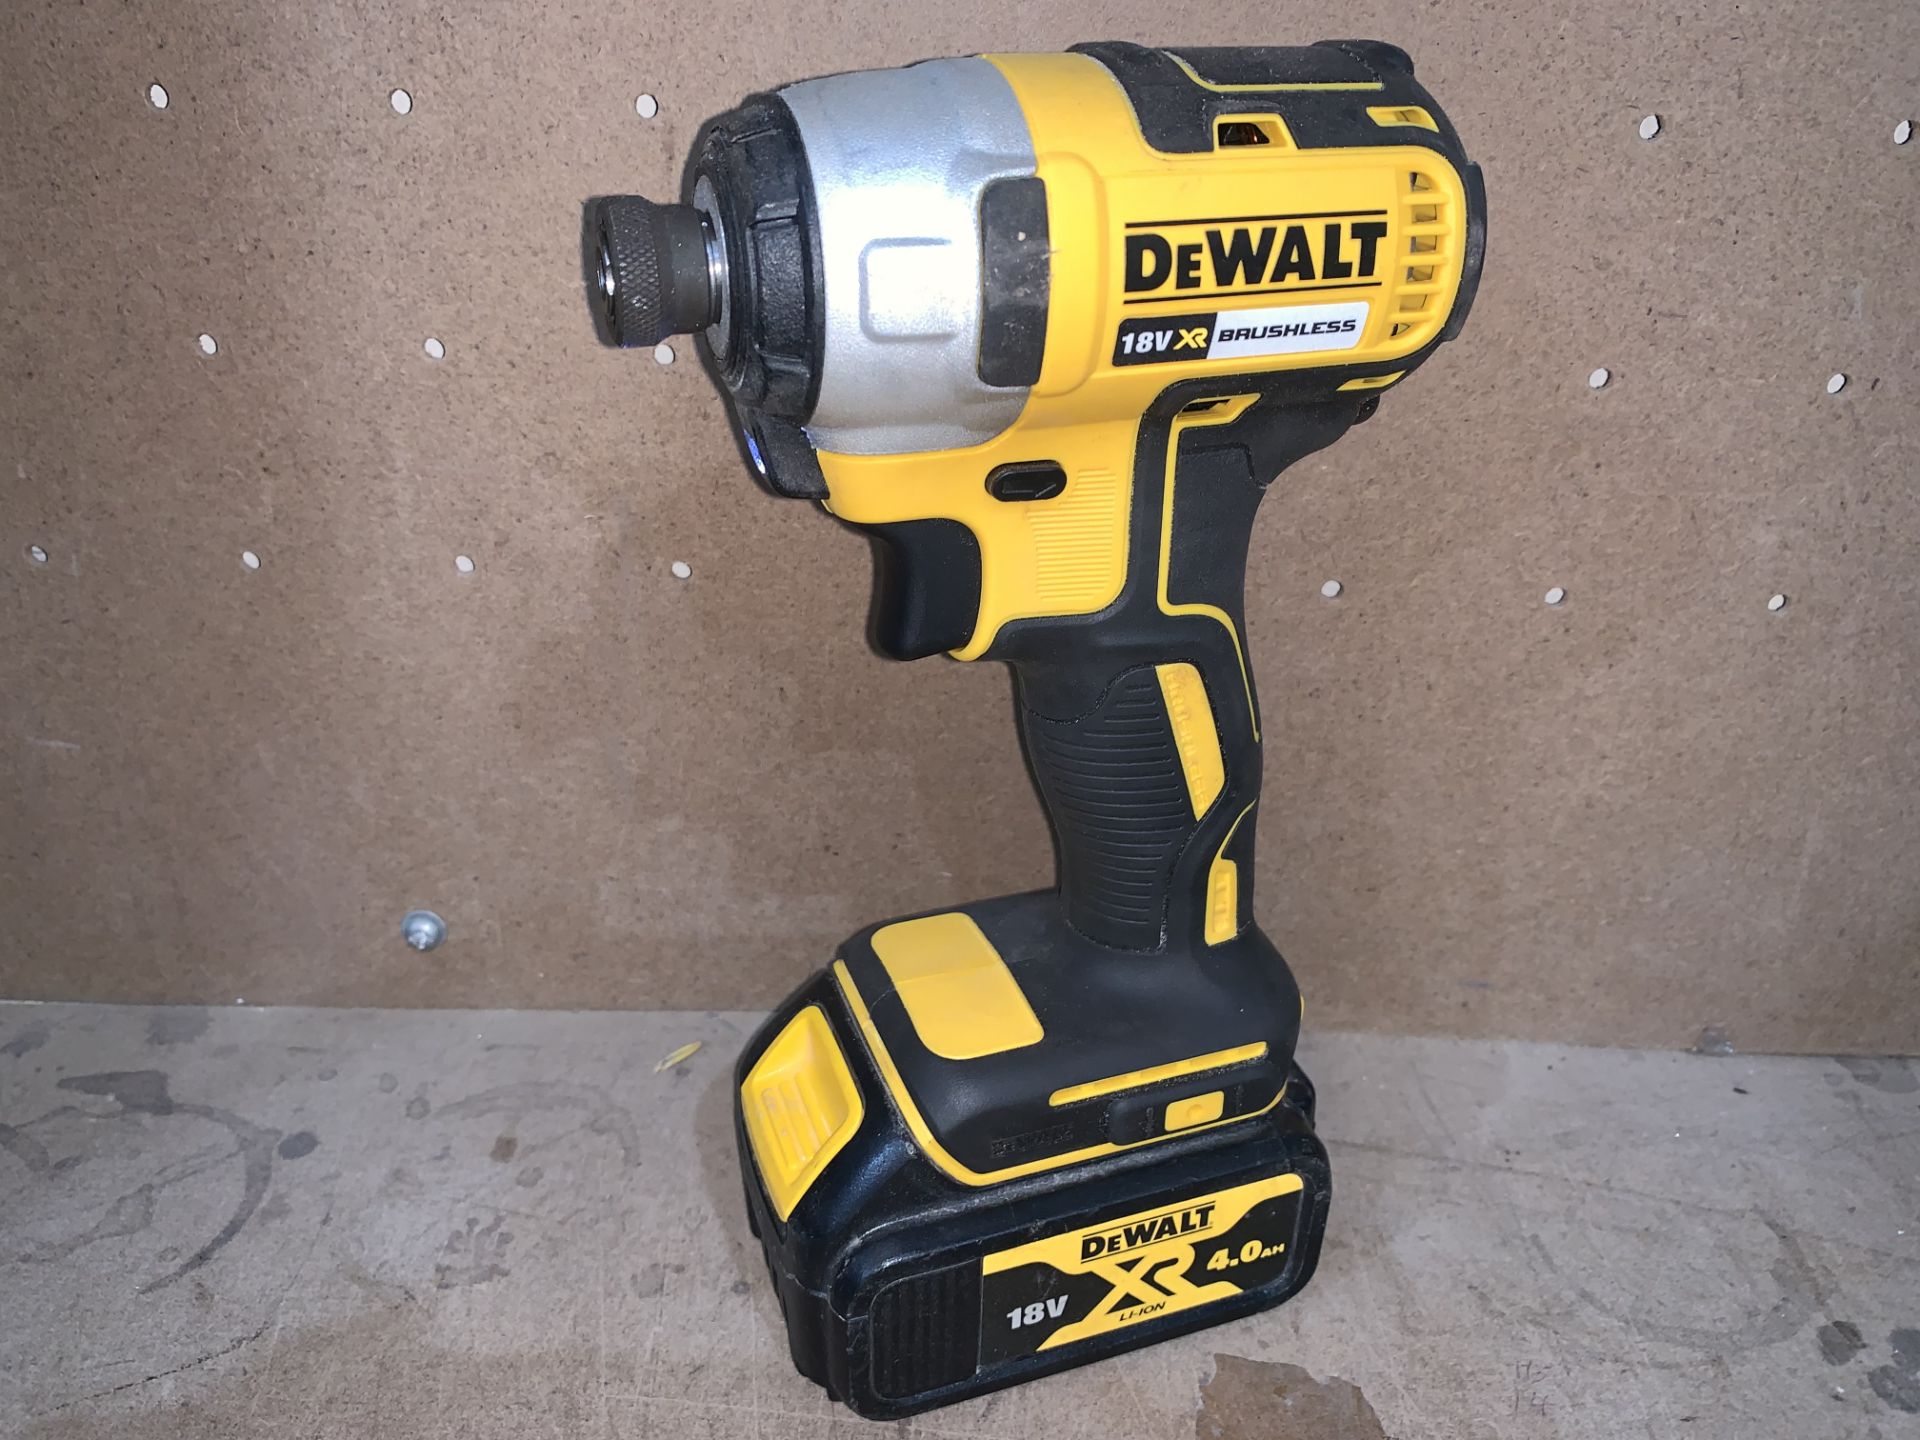 DEWALT DCF787 IMPACT DRIVER TYPE 1 COMES WITH BATTERY (UNCHECKED)